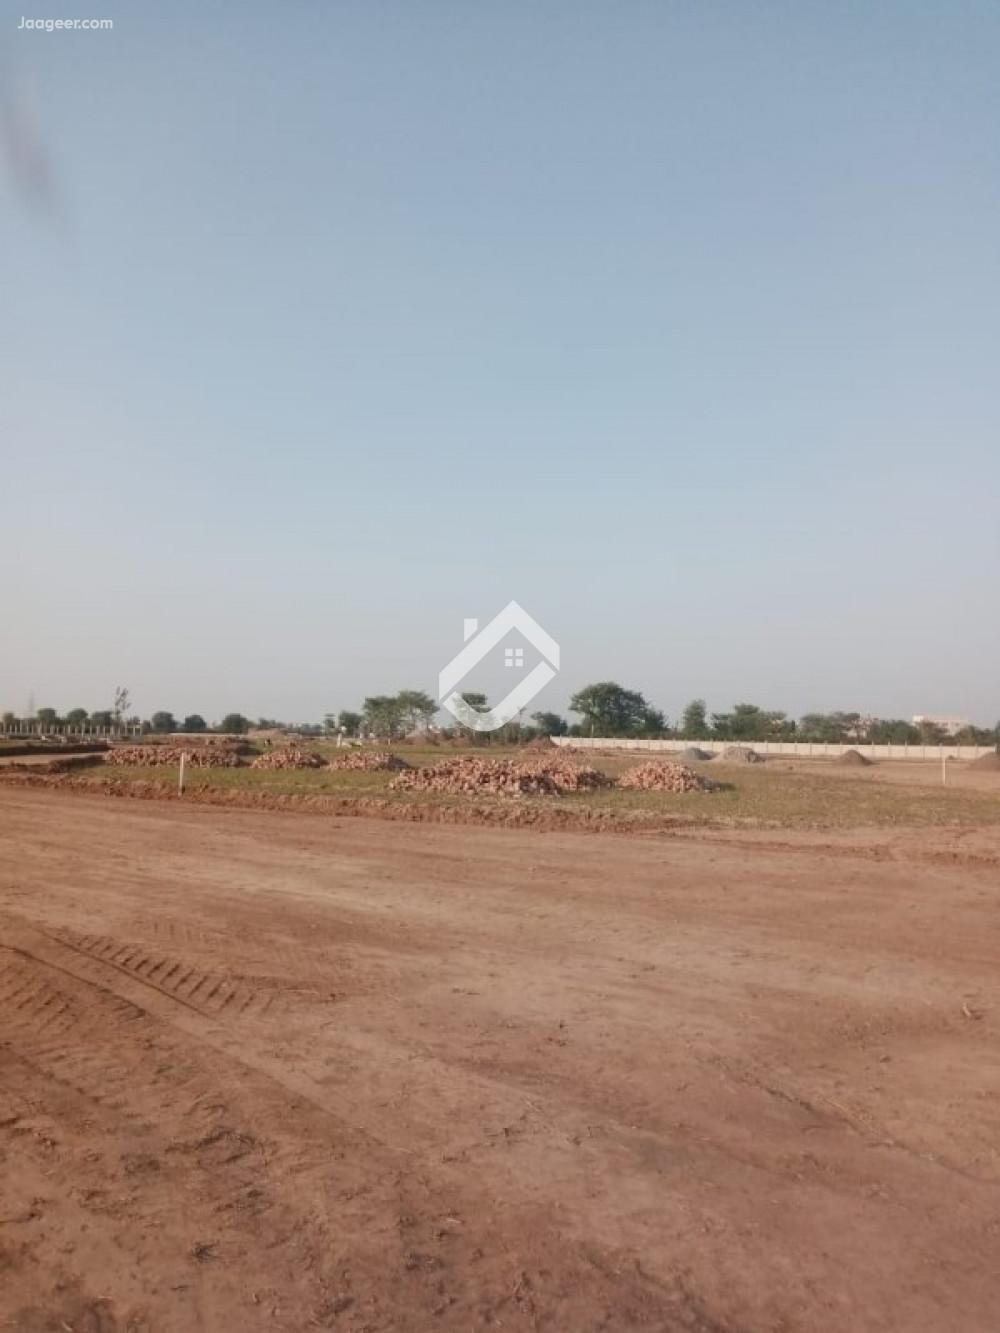 Main image 5 Marla Residential Plot For Sale In National City ------